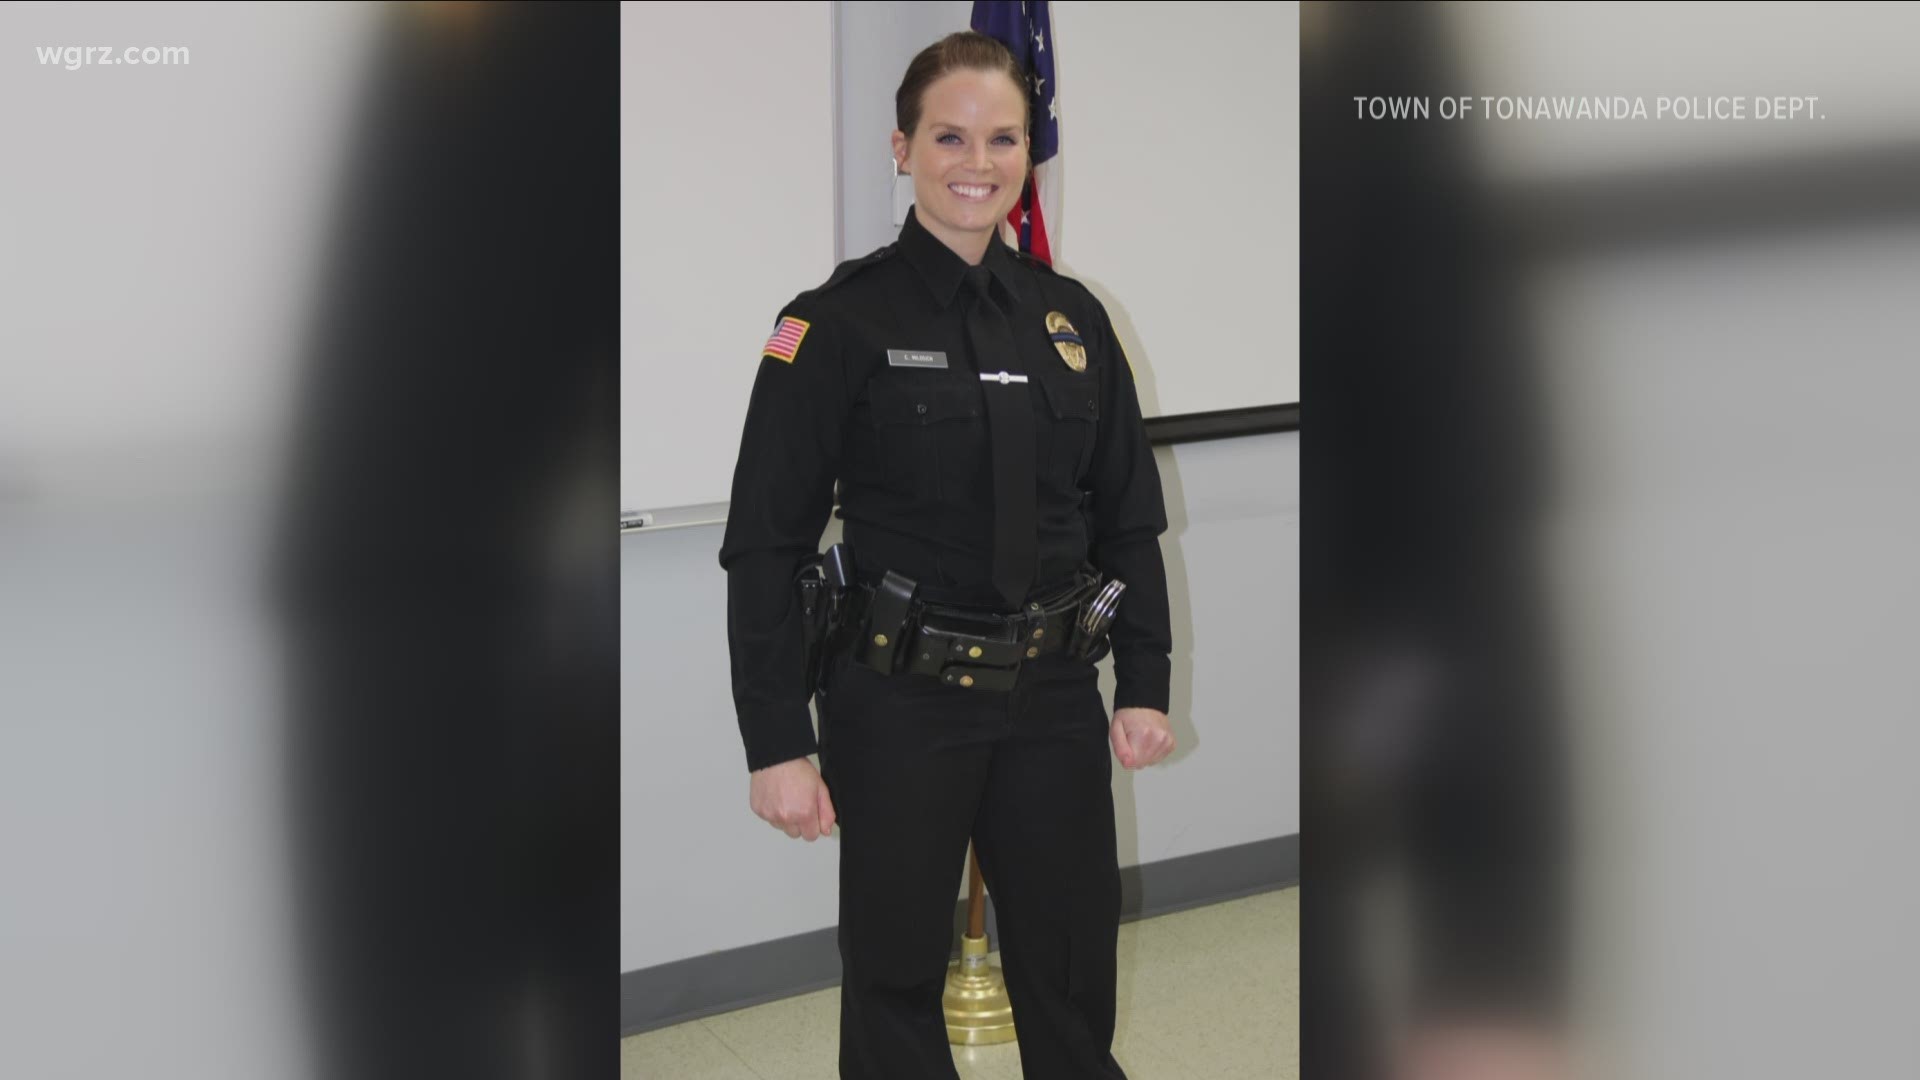 Lt. Christine Milosich passed away after tough battle with cancer